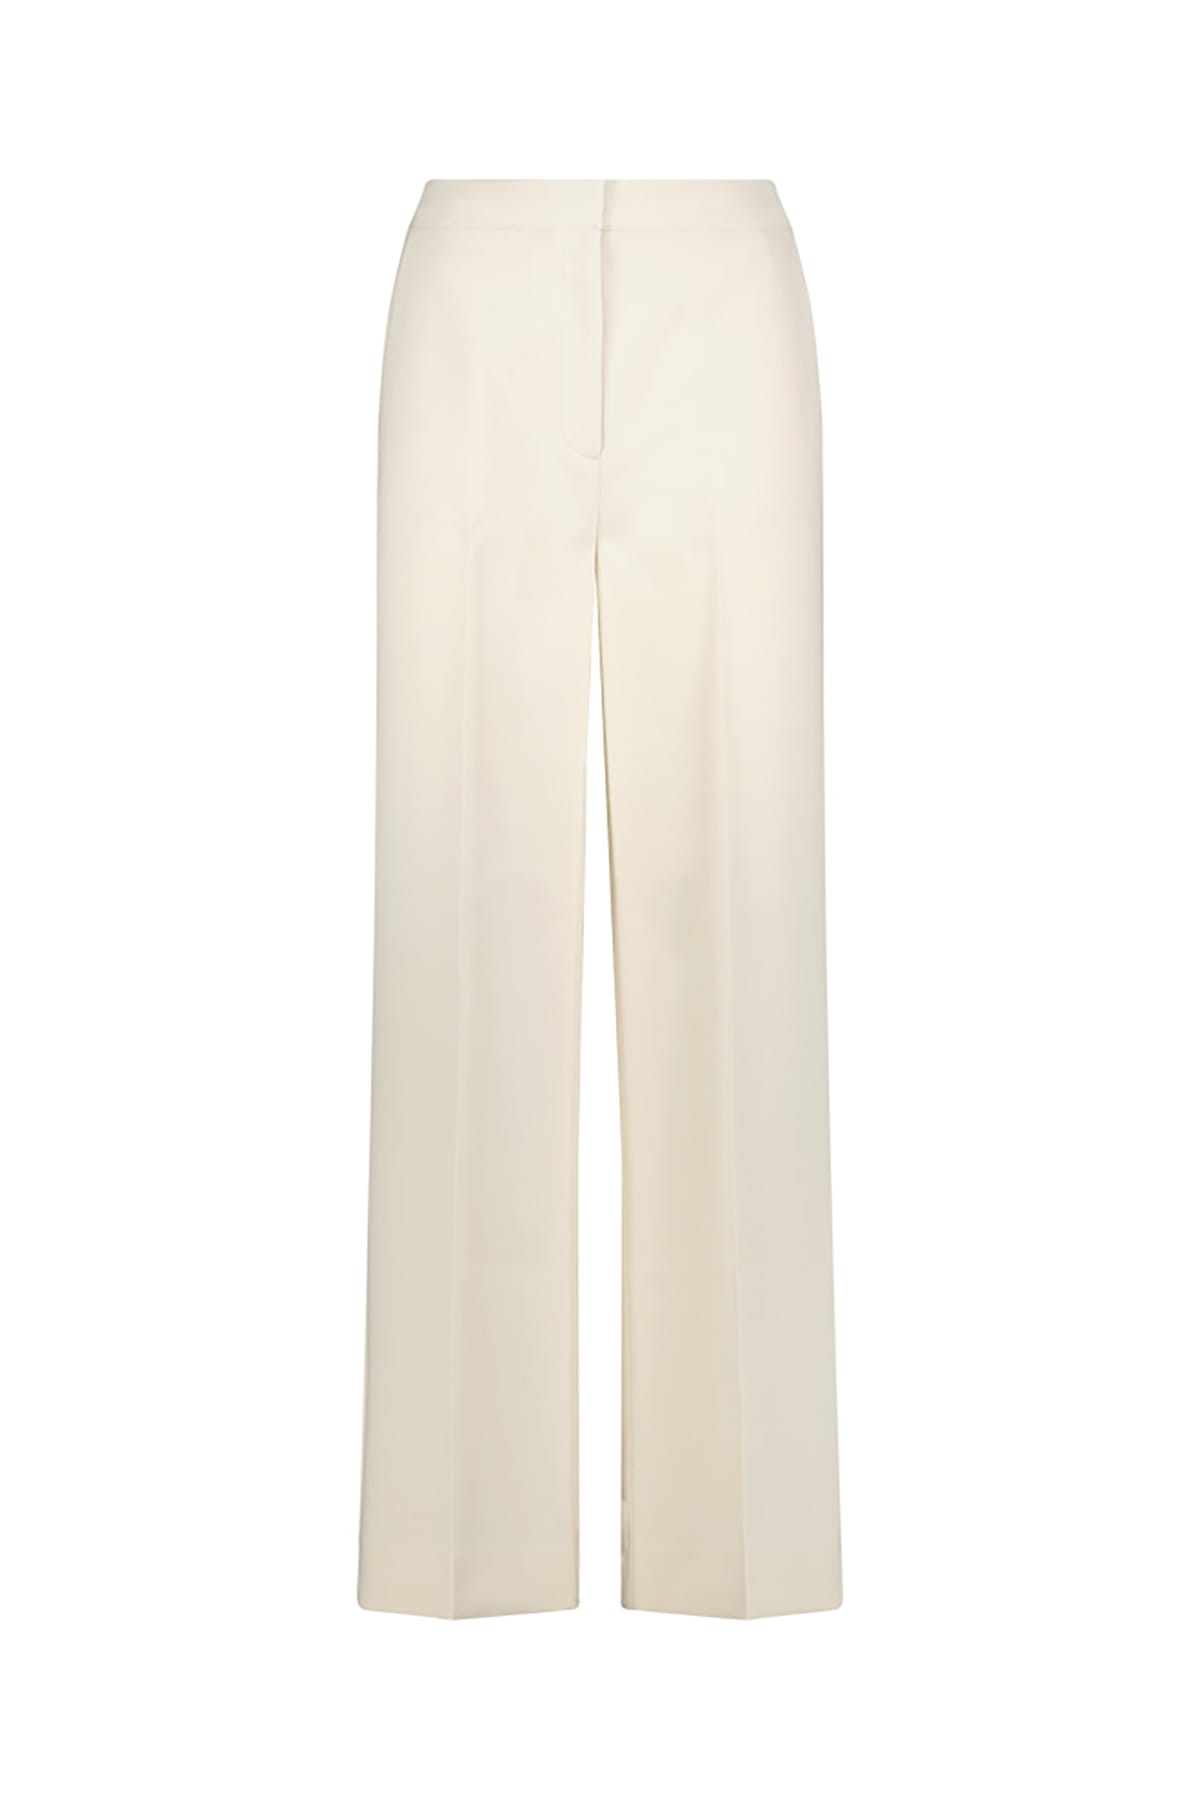 Hose Moore pants Egg White Hose Another Label 